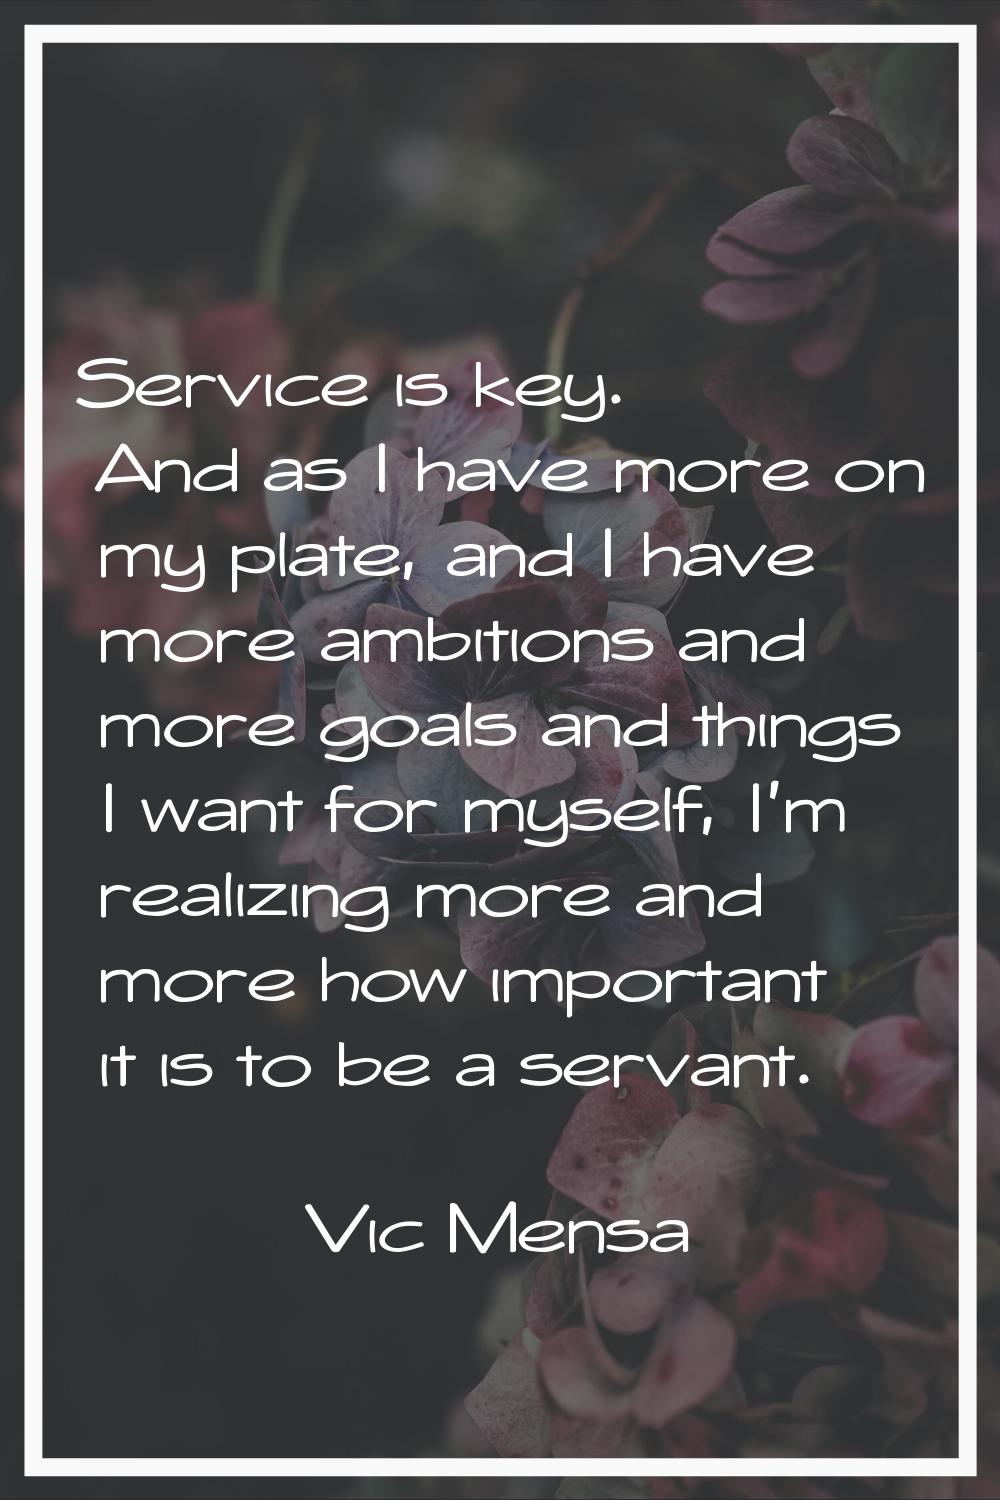 Service is key. And as I have more on my plate, and I have more ambitions and more goals and things